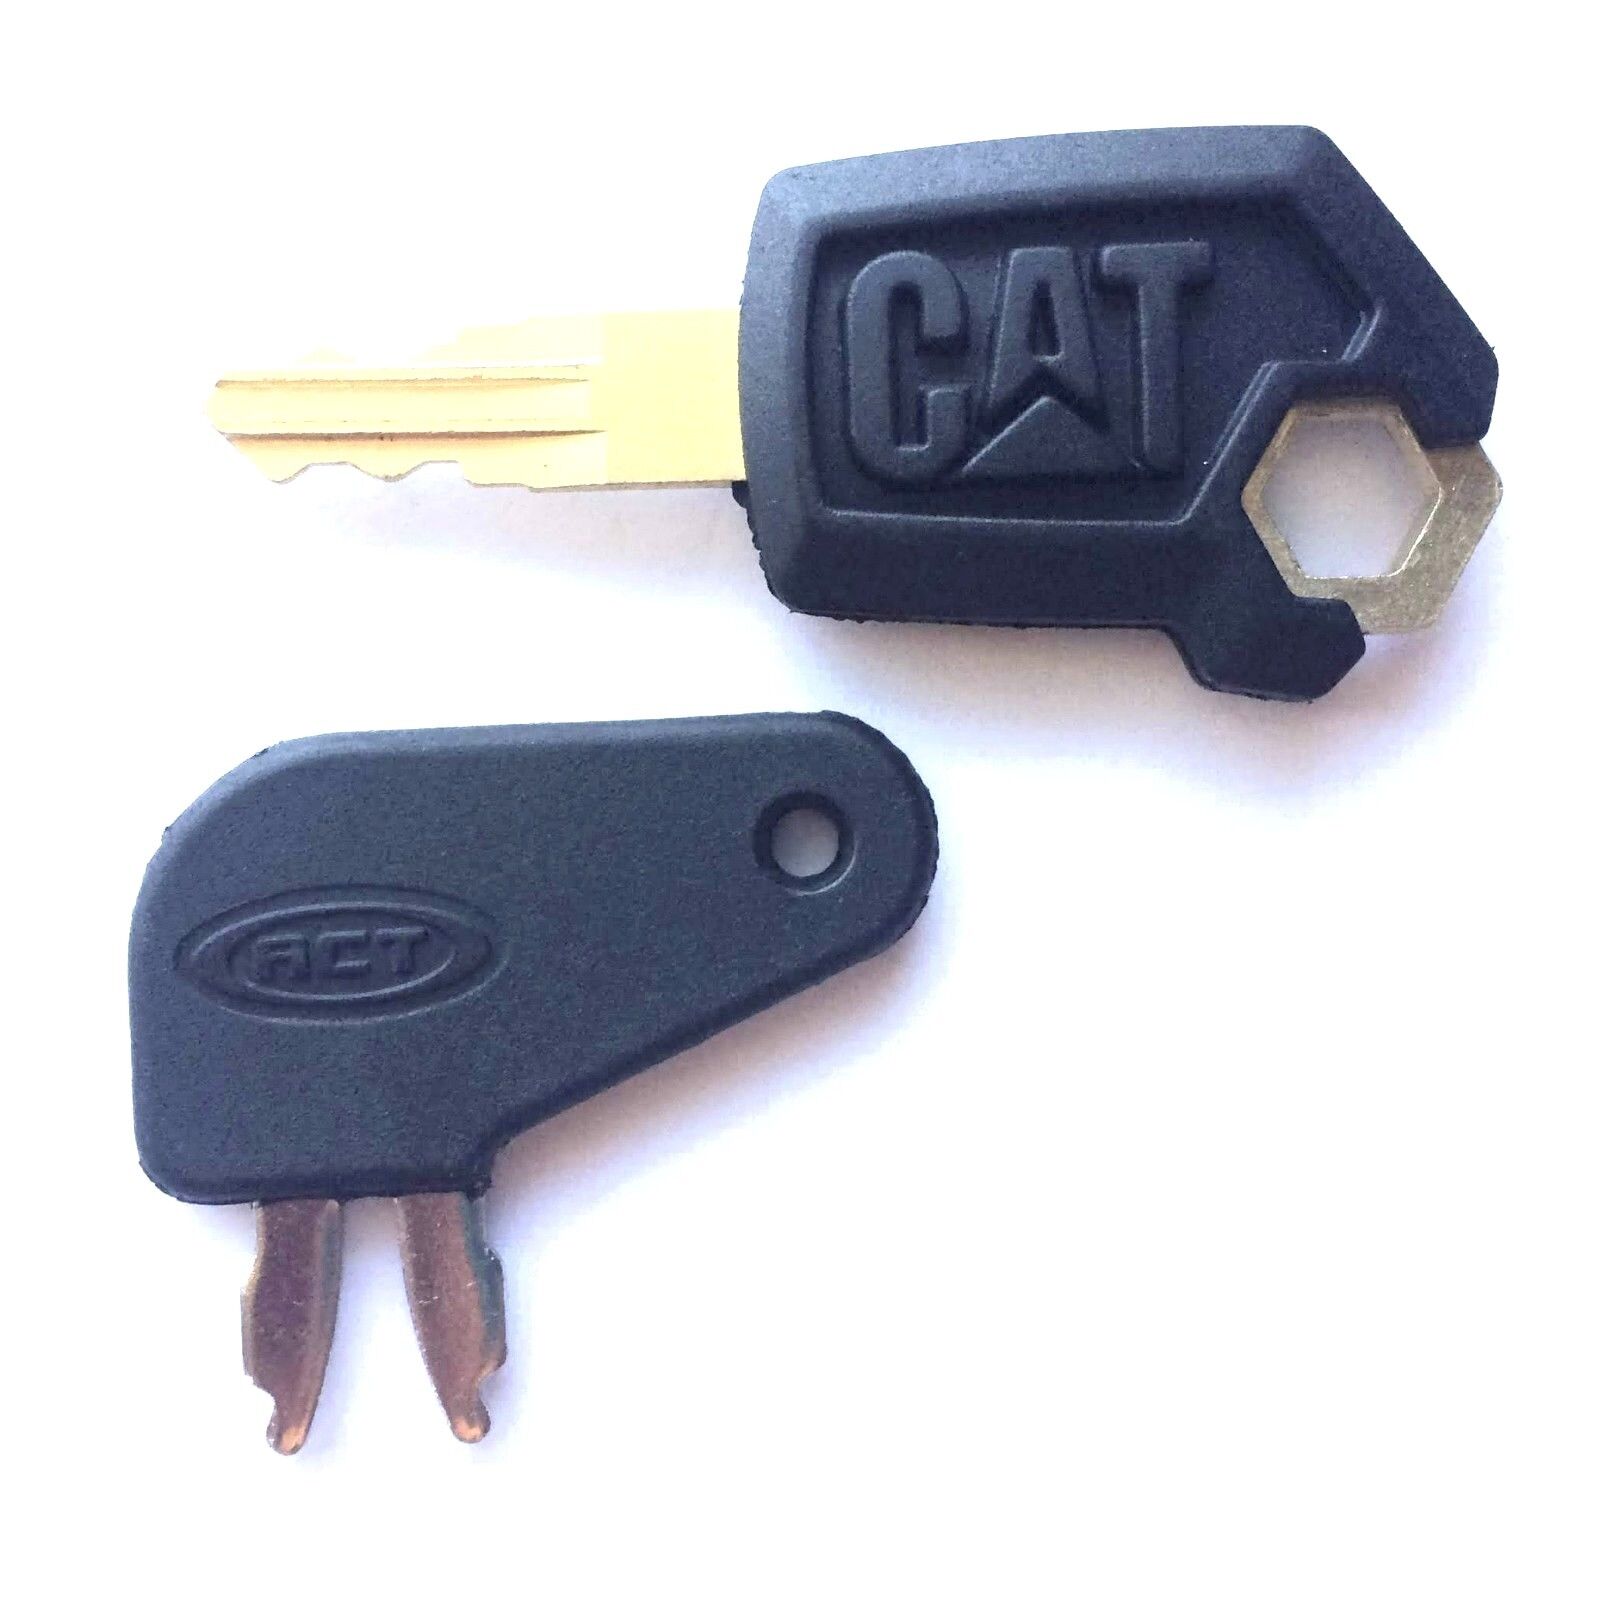 CAT Caterpillar Equipment Key Set  Ignition and Master Disconnect Keys with Logo Aftermarket 8H-5306, 5P-8500 - фотография #2